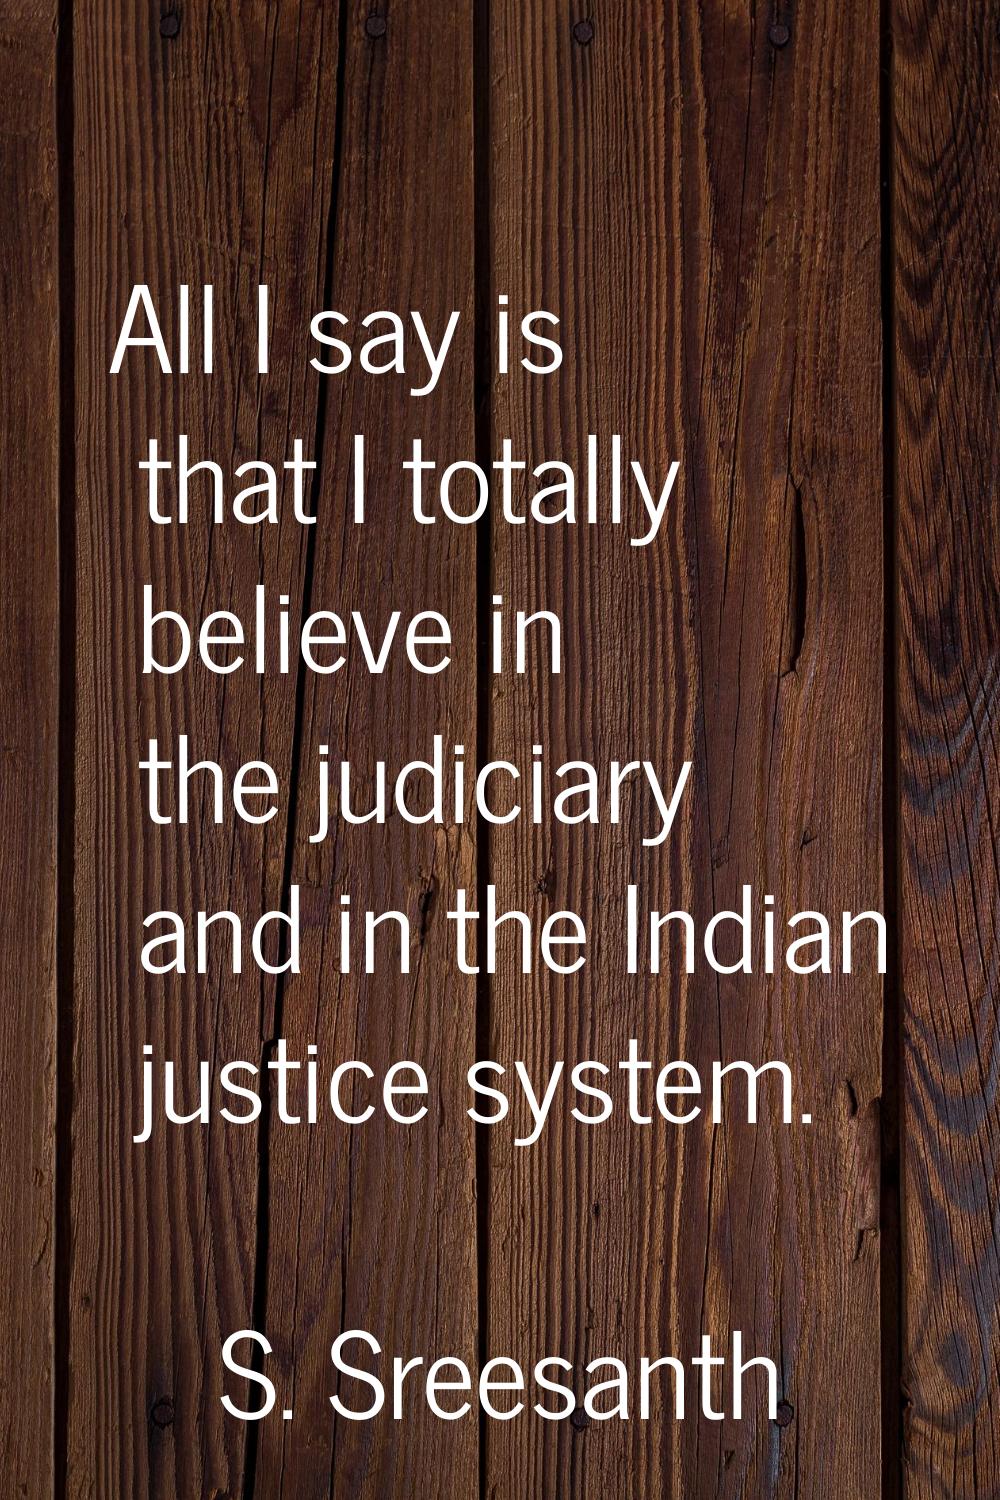 All I say is that I totally believe in the judiciary and in the Indian justice system.